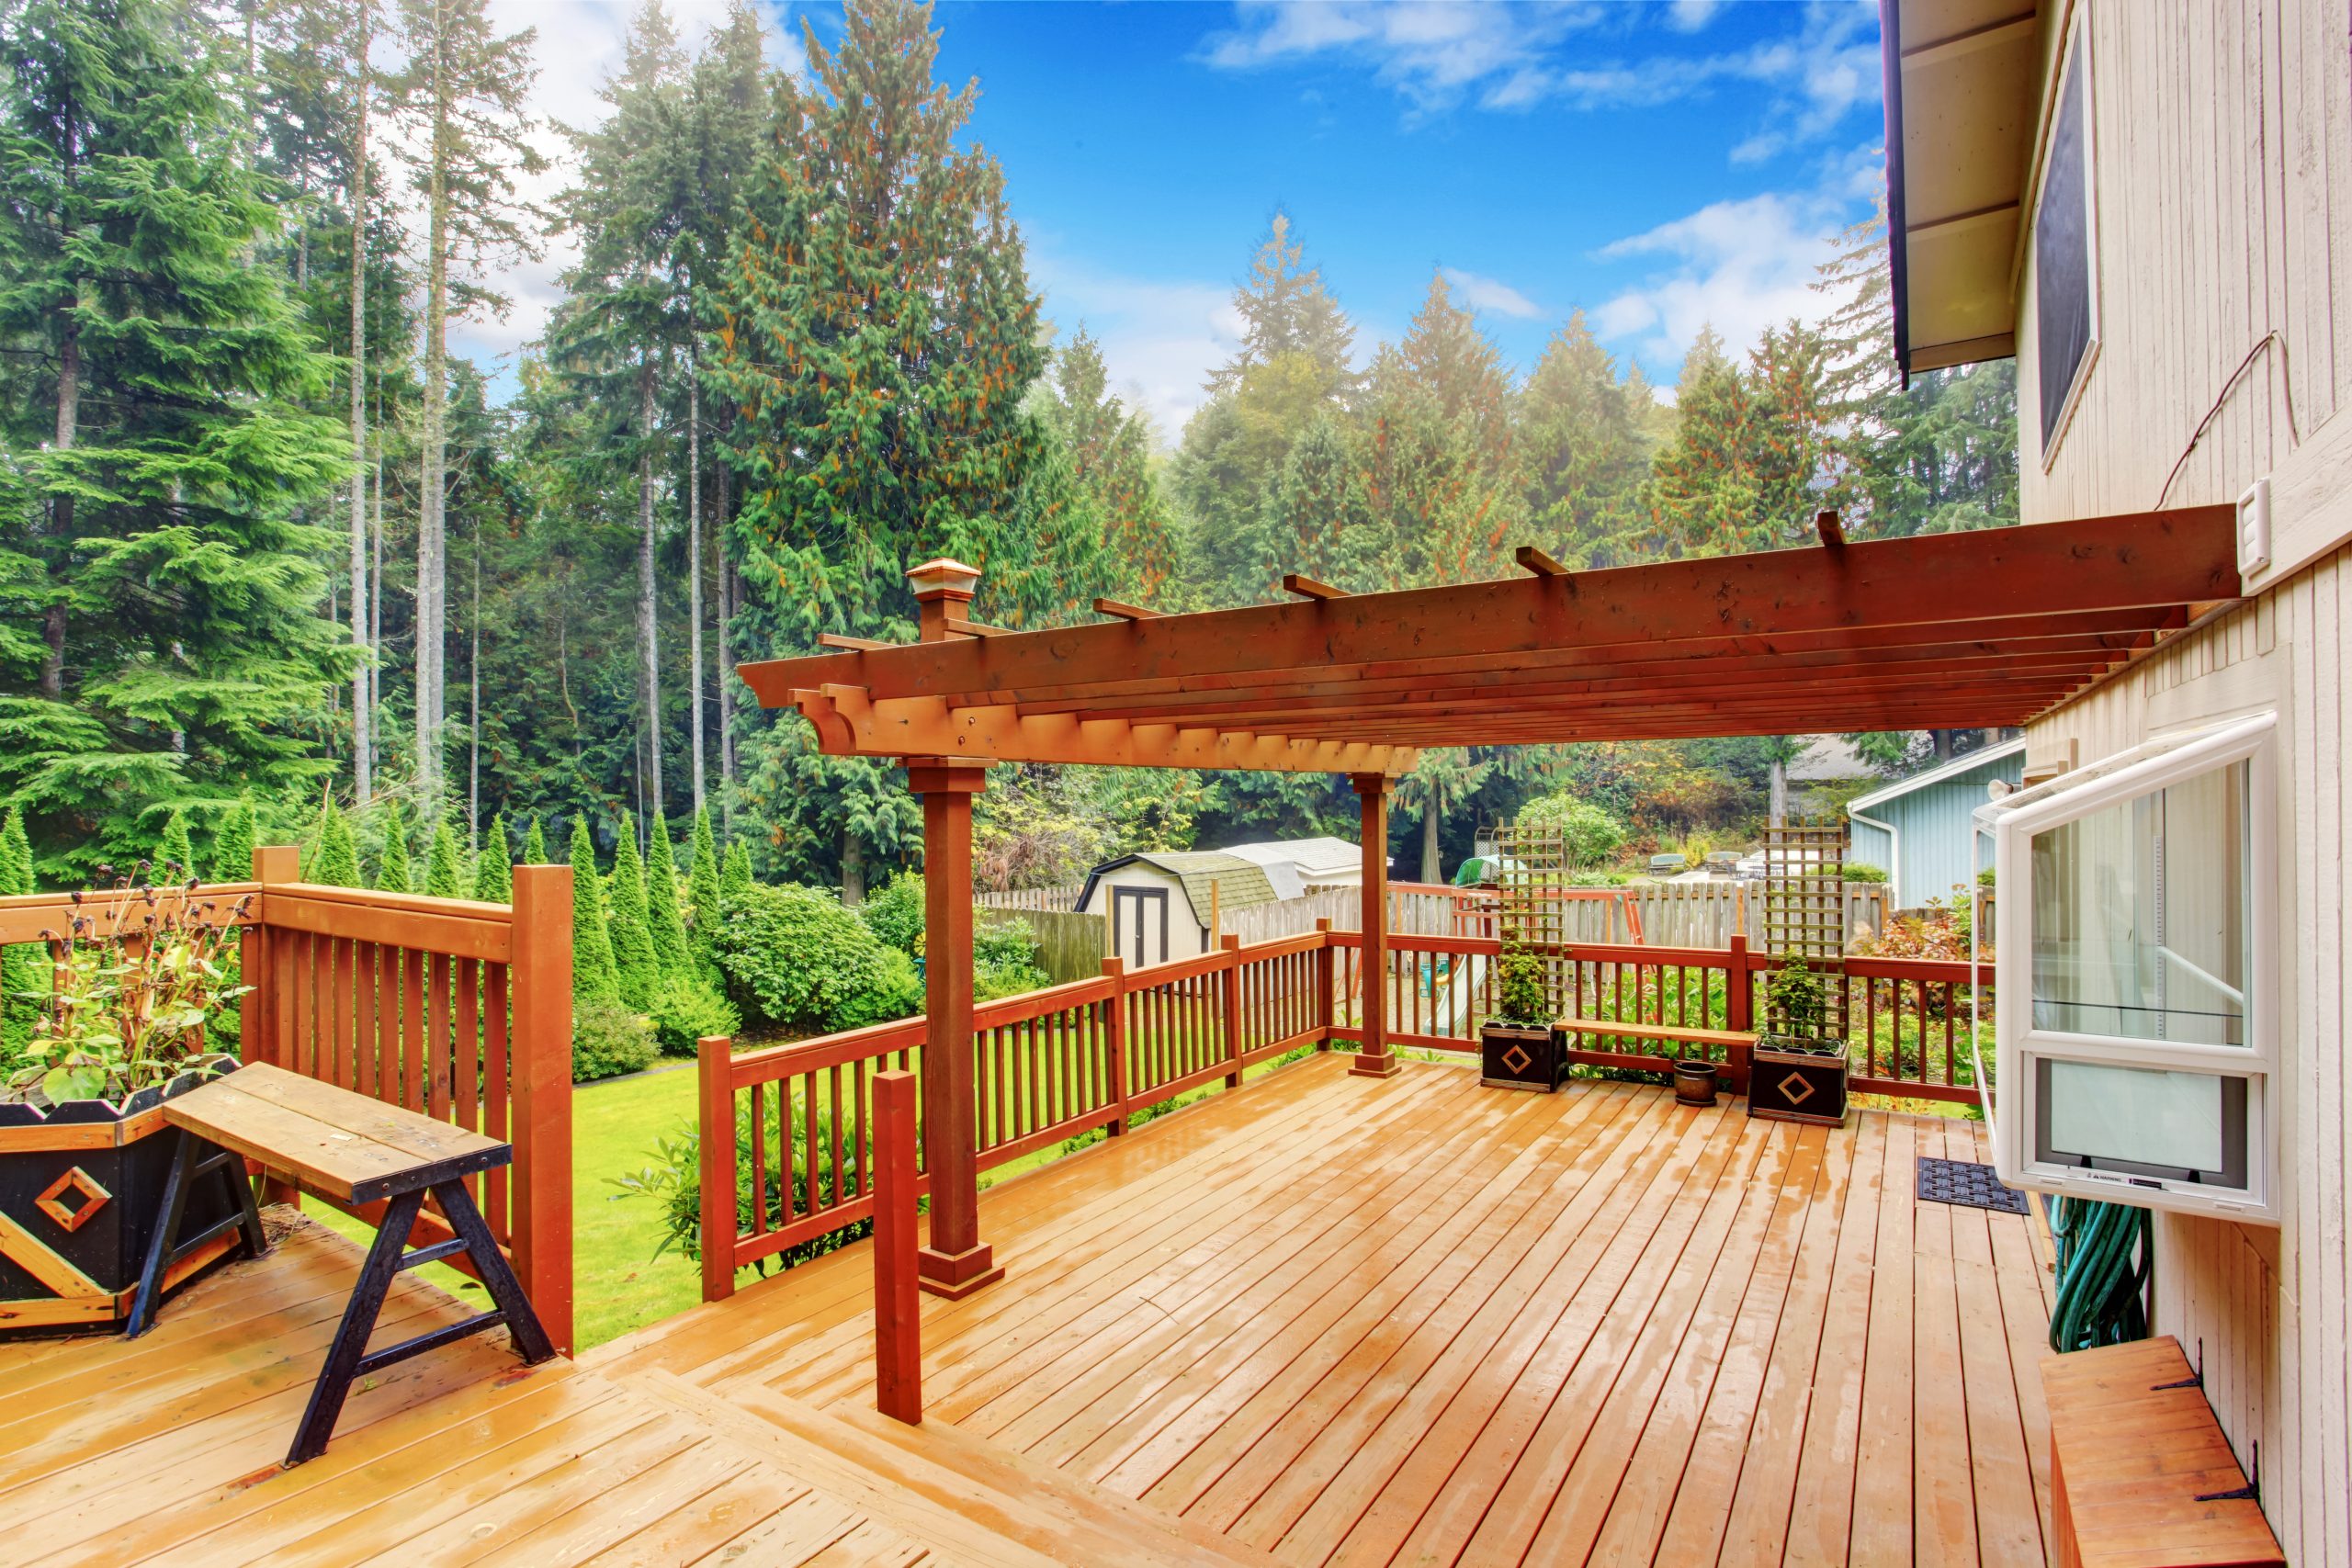 All Decked Out: Summer 2020 Deck Trends